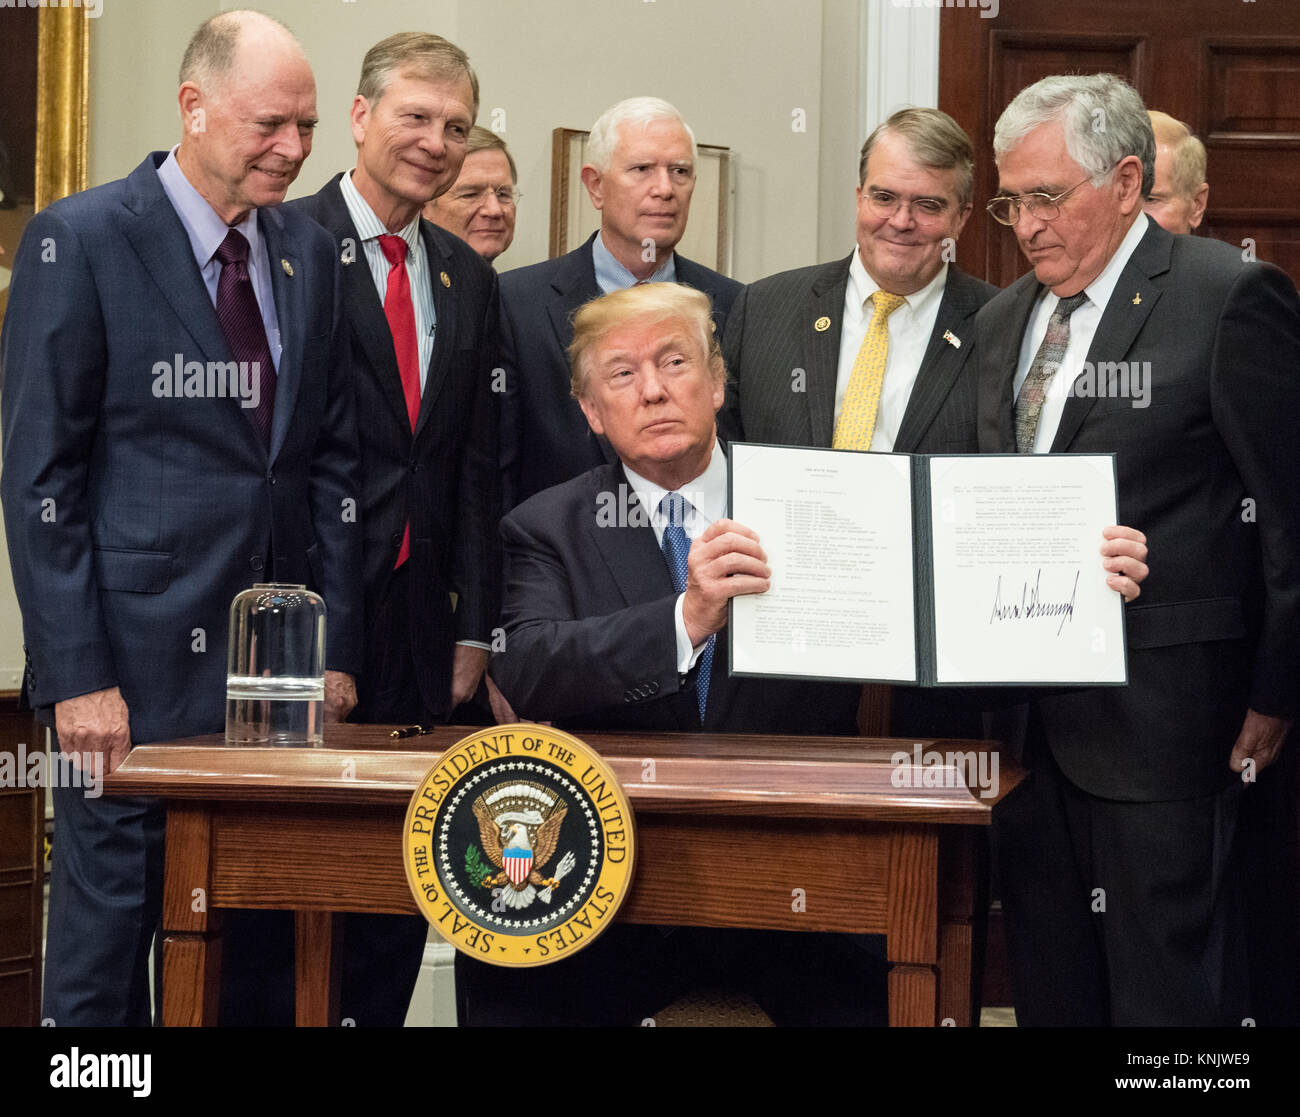 United States President Donald J. Trump signs the Presidential Space Directive - 1, directing NASA to return to the moon, alongside members of the Senate, Congress, NASA, and commercial space companies in the Roosevelt room of the White House in Washington, Monday, December 11, 2017. Credit: Aubrey Gemignani/NASA/CNP/AdMedia/Newscom/Alamy Live News Stock Photo